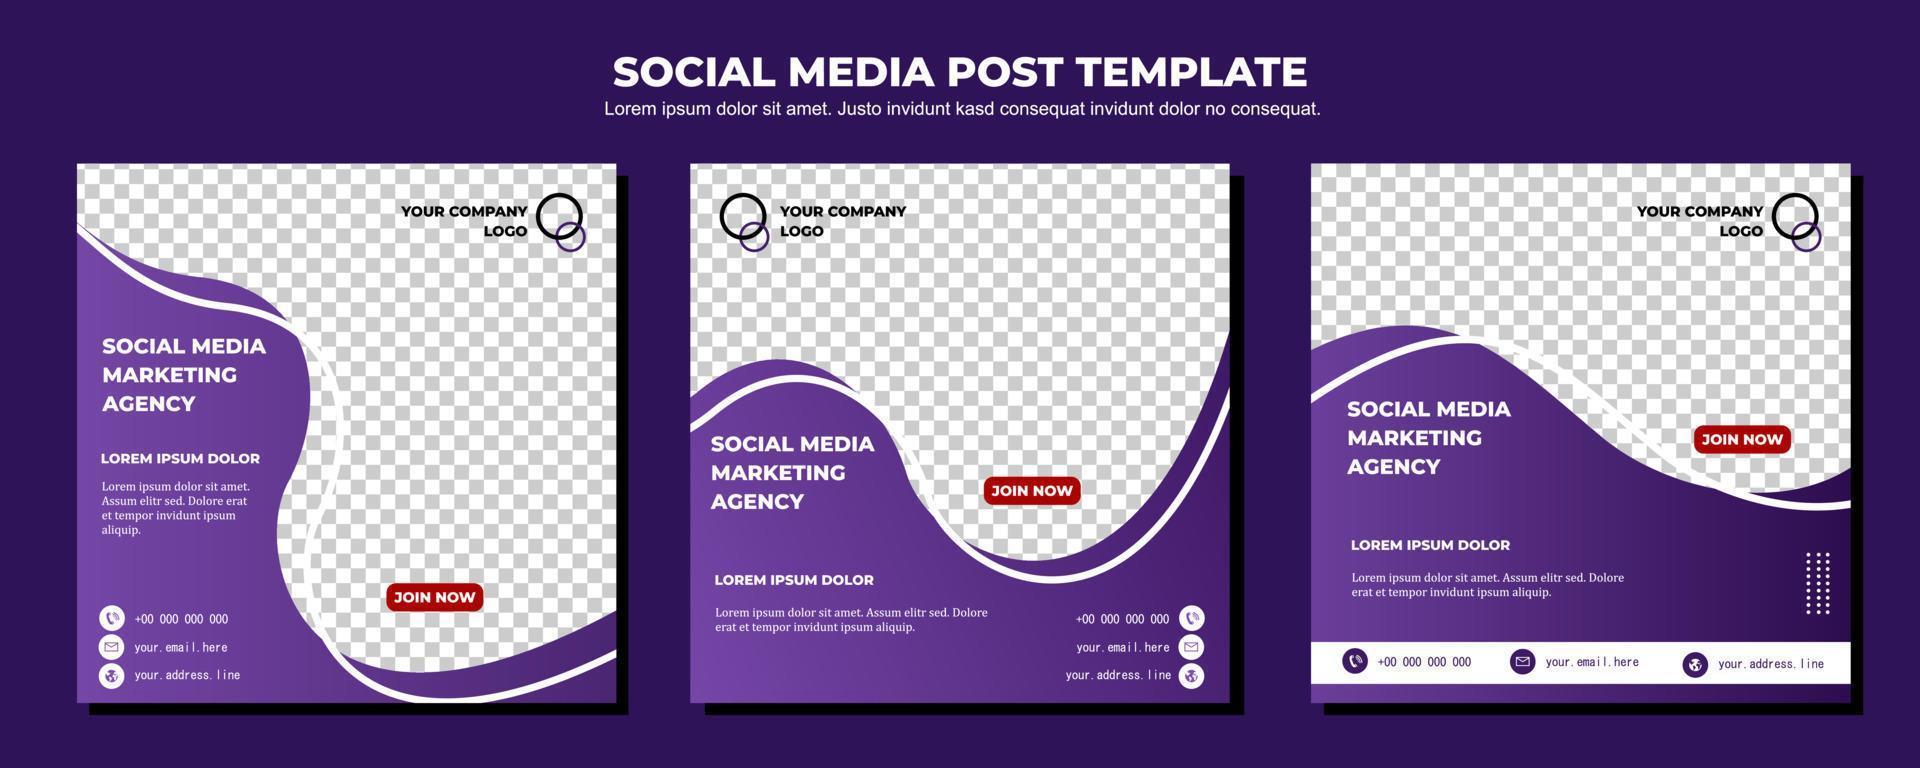 Purple Vector Social Media Post Template, vector art illustration and text, Simple and Elegant Design Full Color